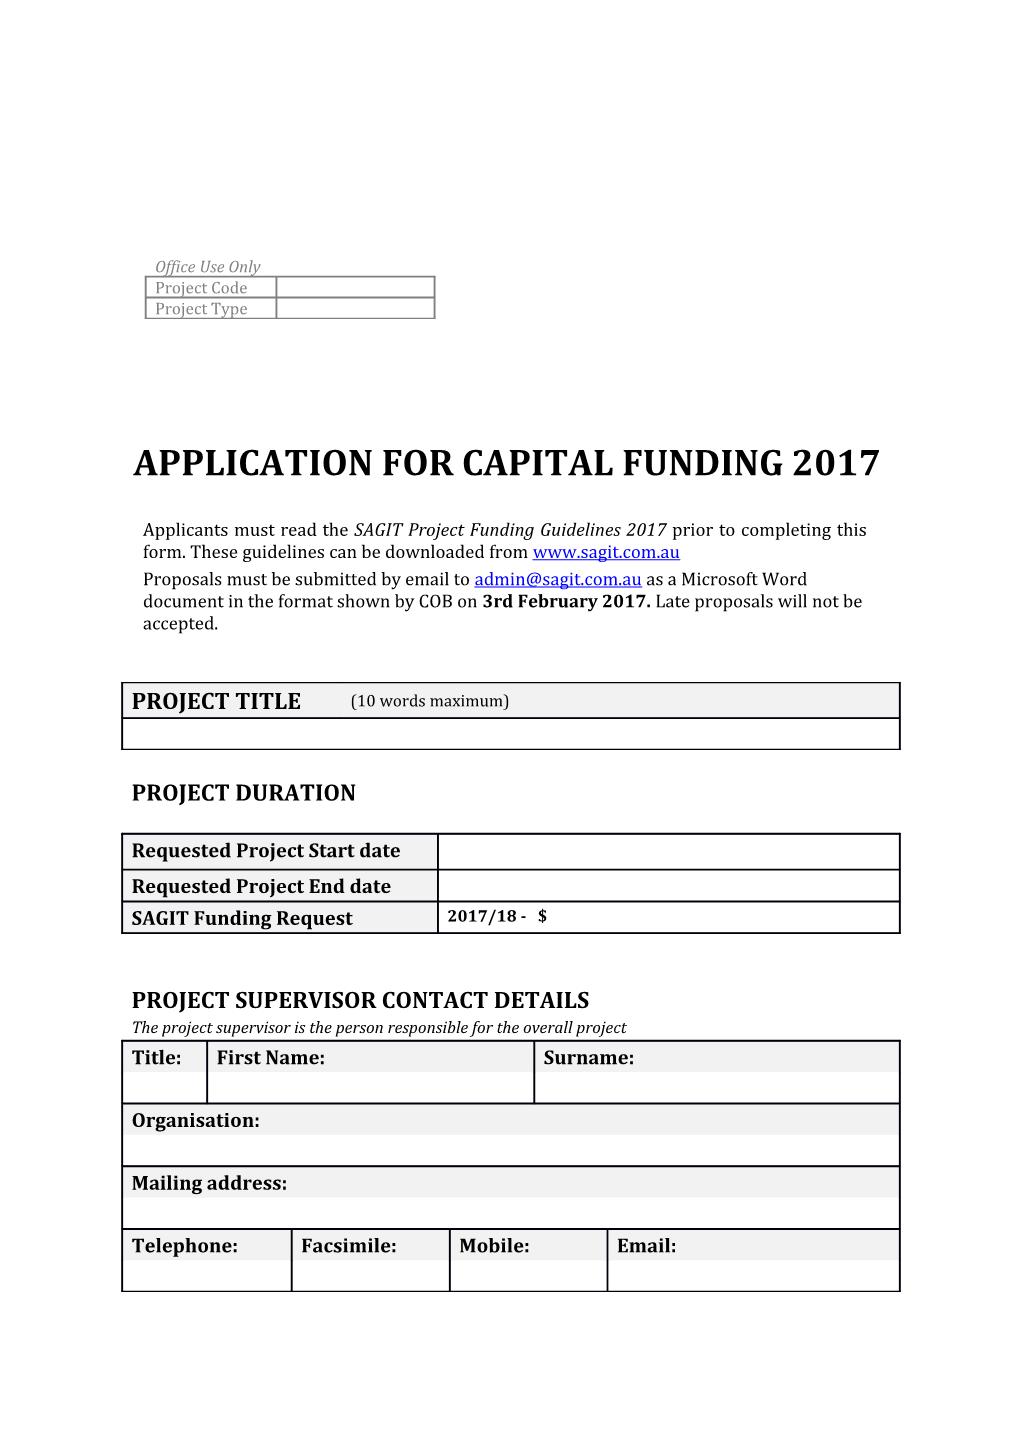 Application for Capital Funding 2017